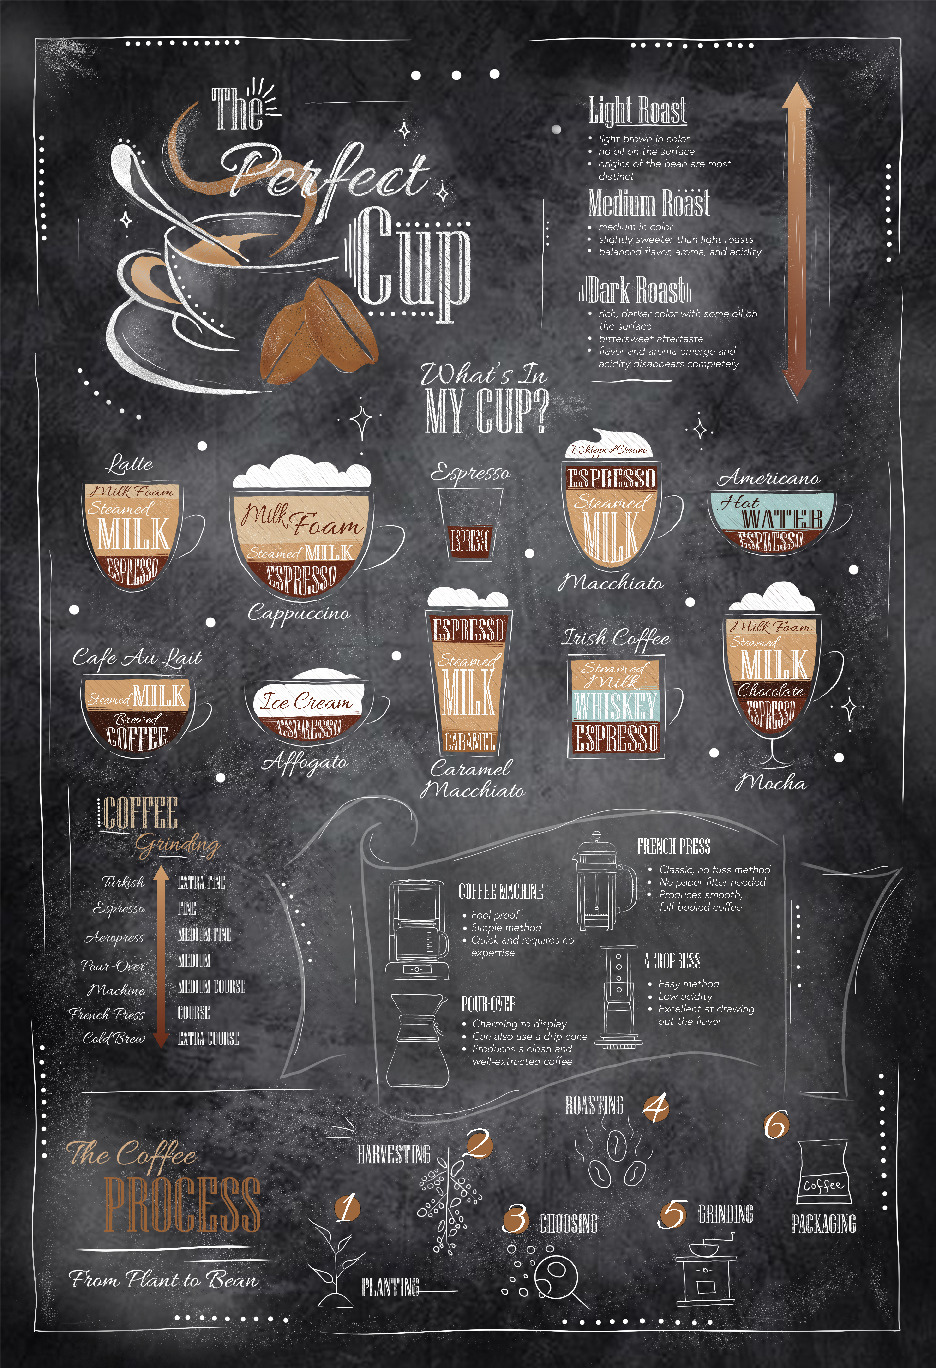 Poster that looks like a chalkboard with images of different types of coffee and corresponding text